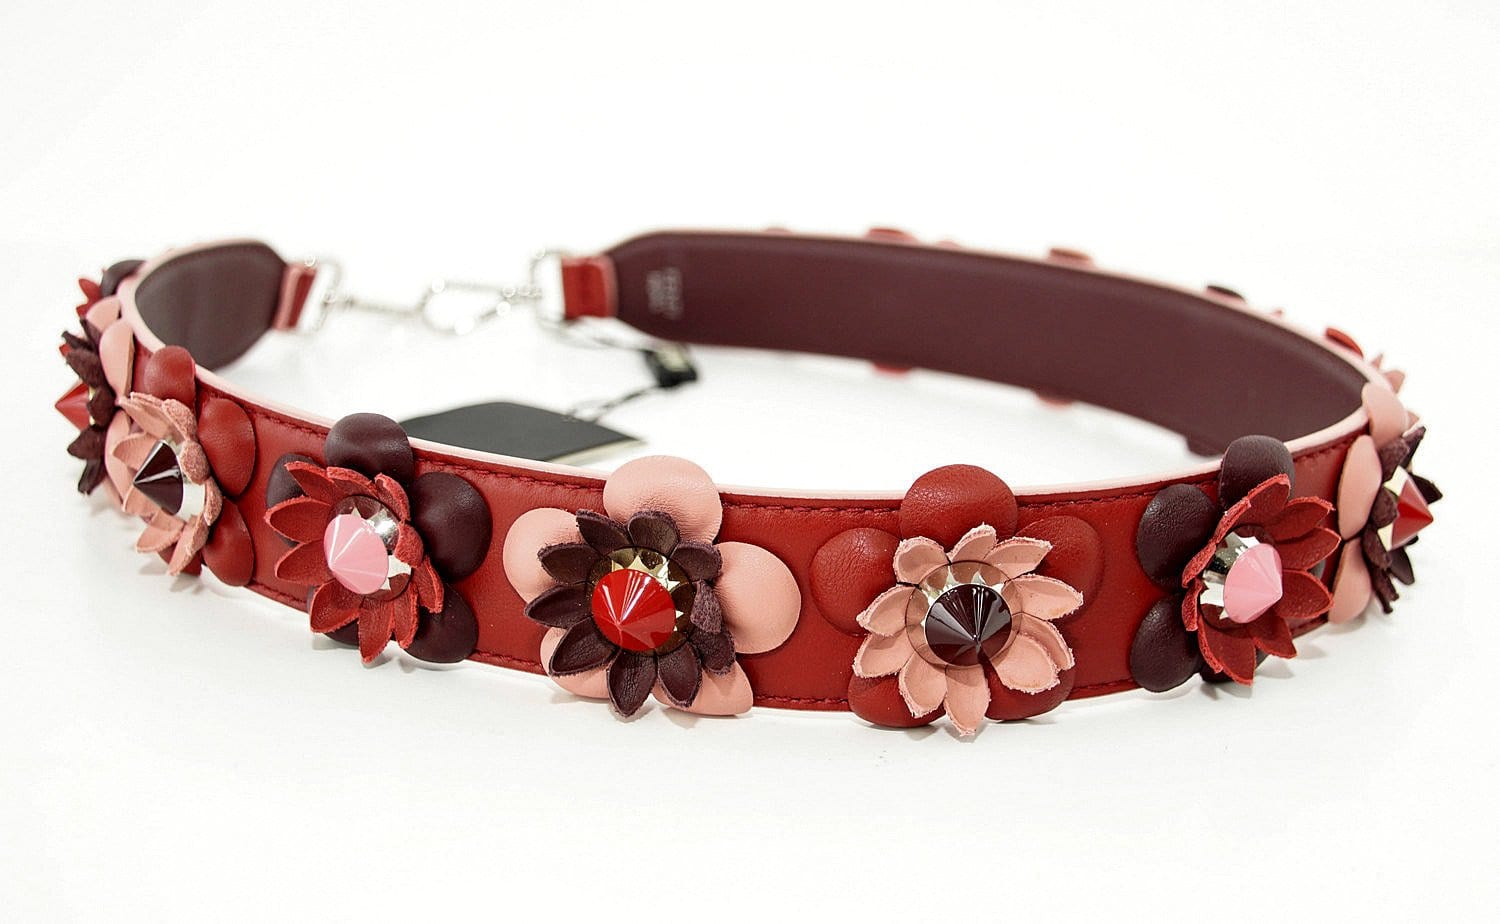 Fendi 3D Flower Strap You Elaphe Studded Leather Applique Limited Edition - mightychic